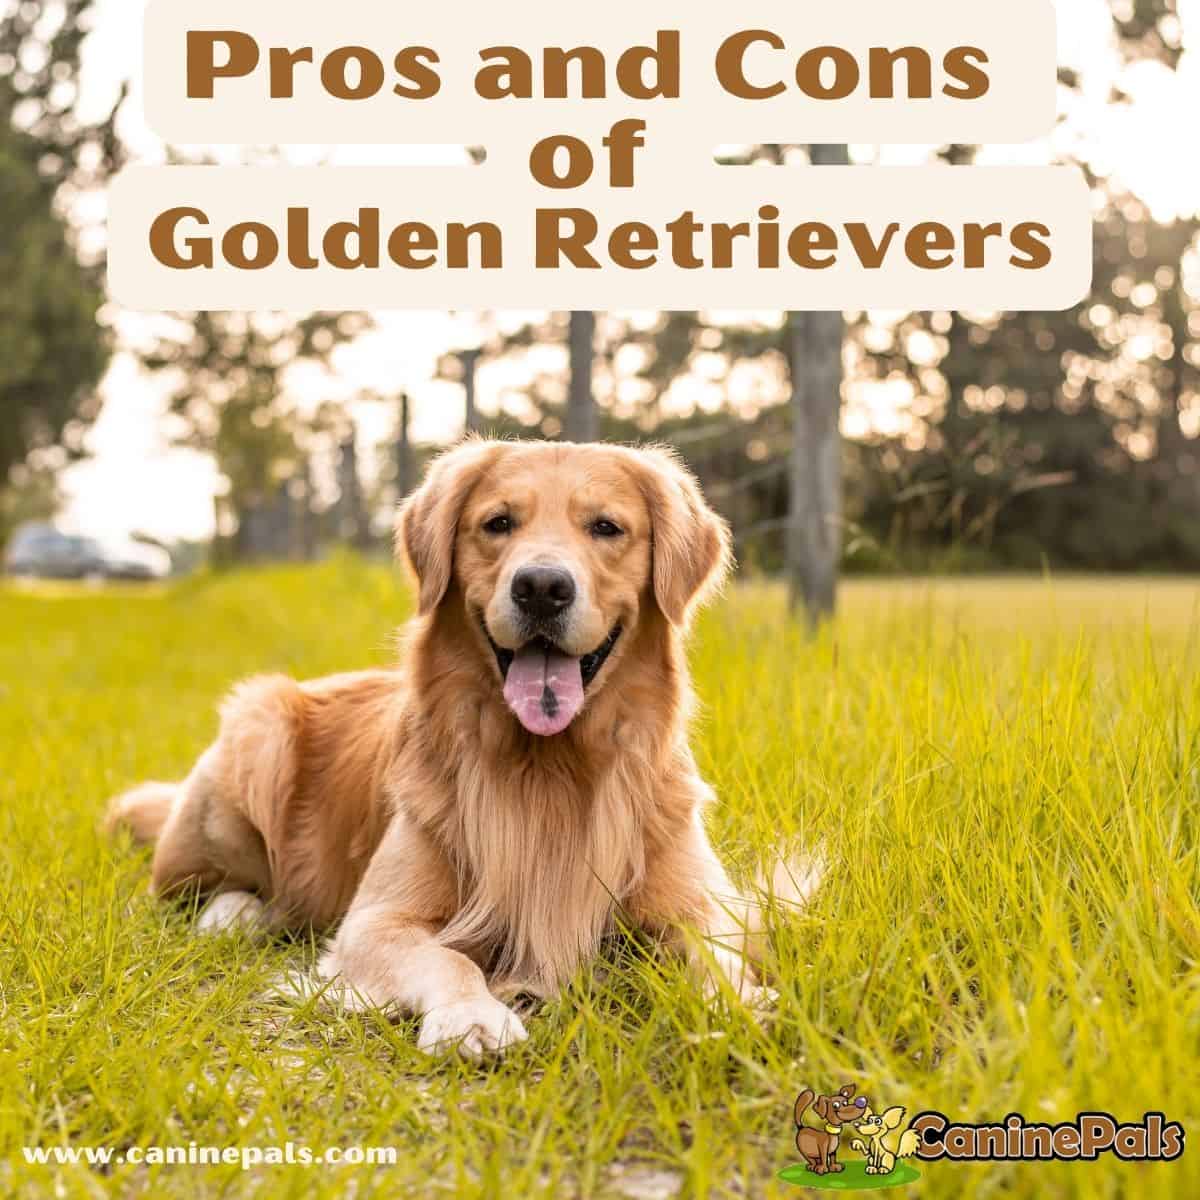 Pros and Cons of Golden Retrievers